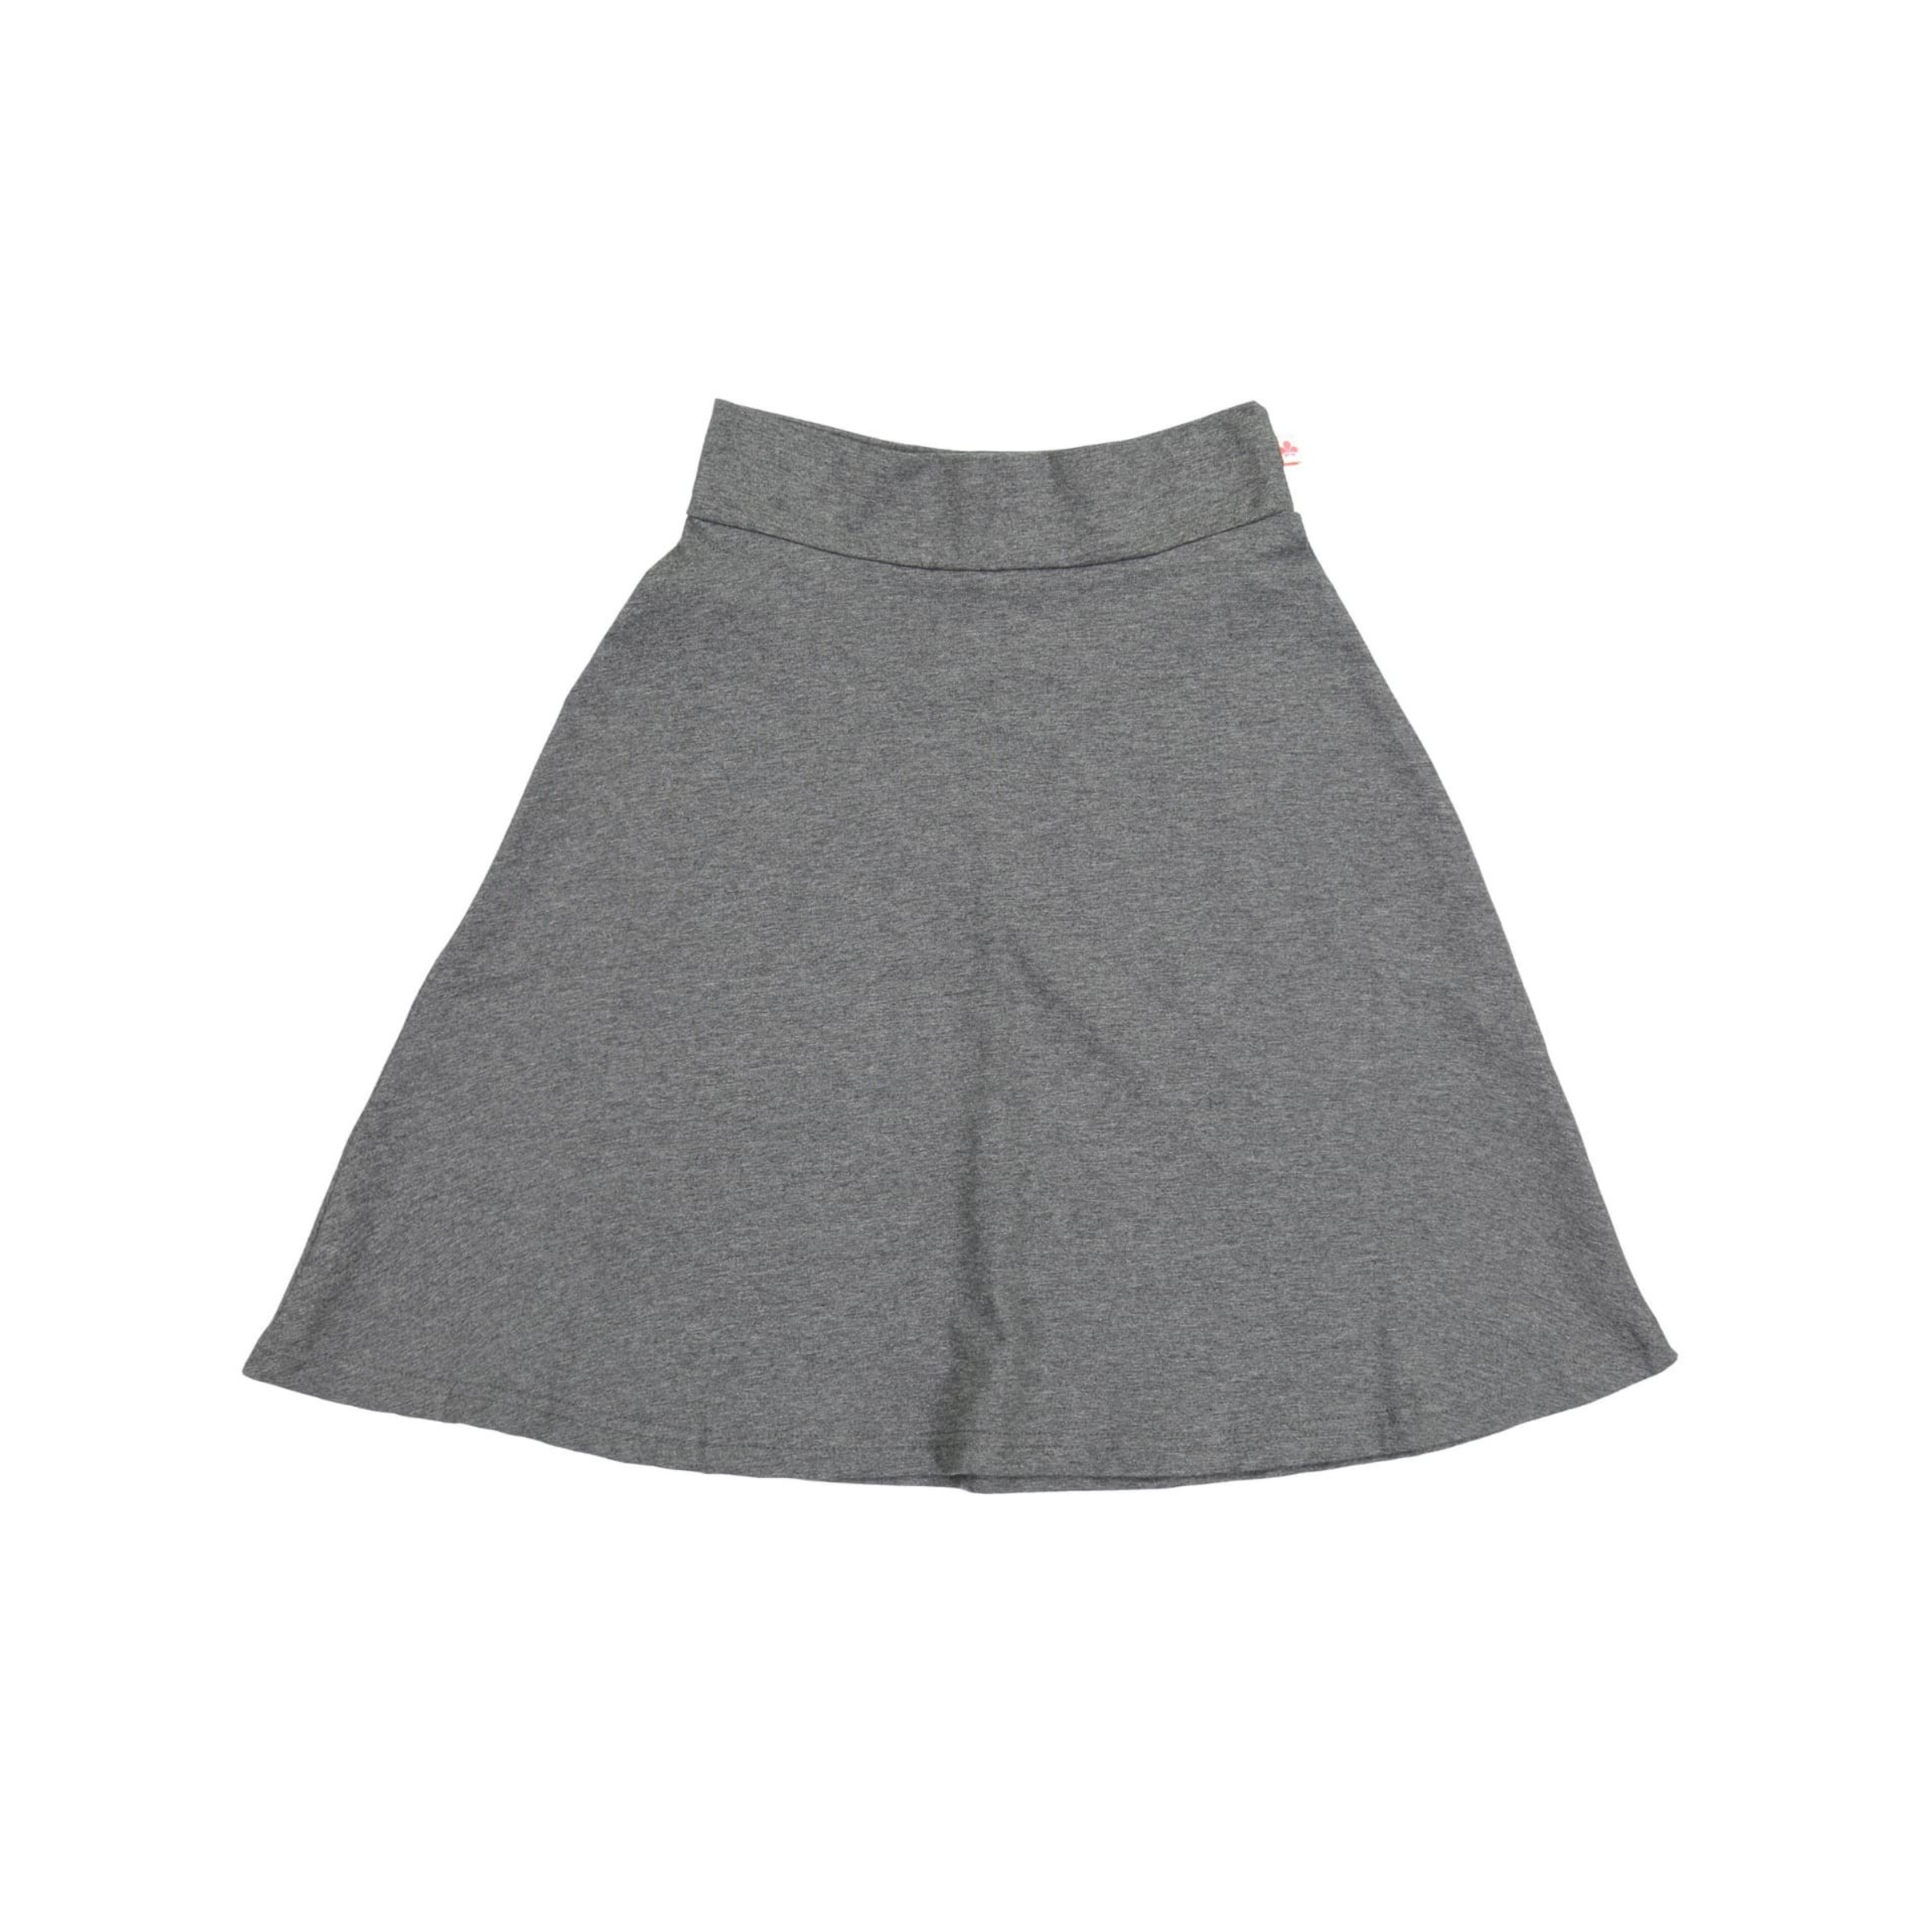 Camp Skirt Classic- Charcoal – Three Bows